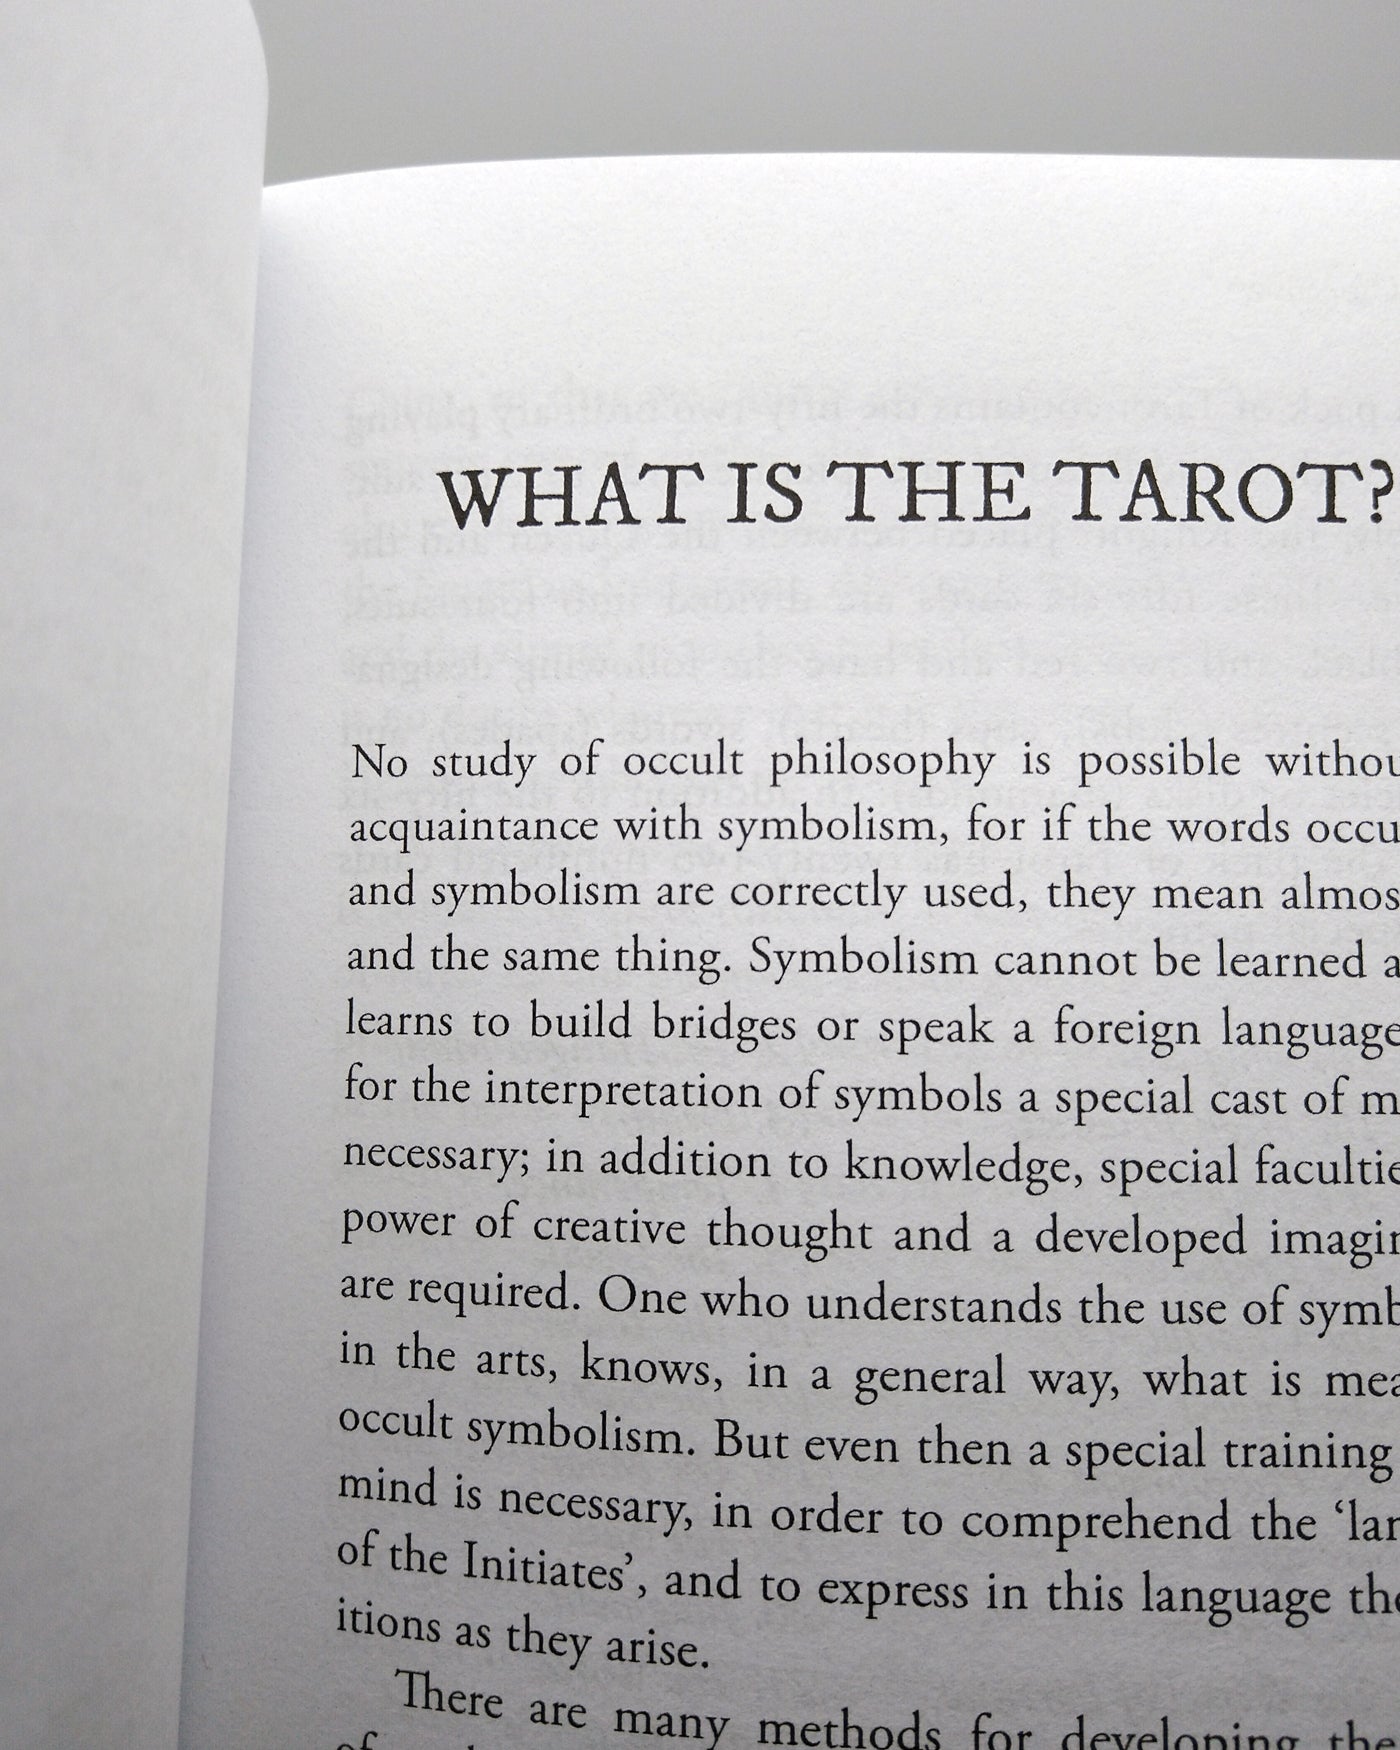 The Symbolism of the Tarot (Annotated): Philosophy of Occultism in Pictures and Numbers